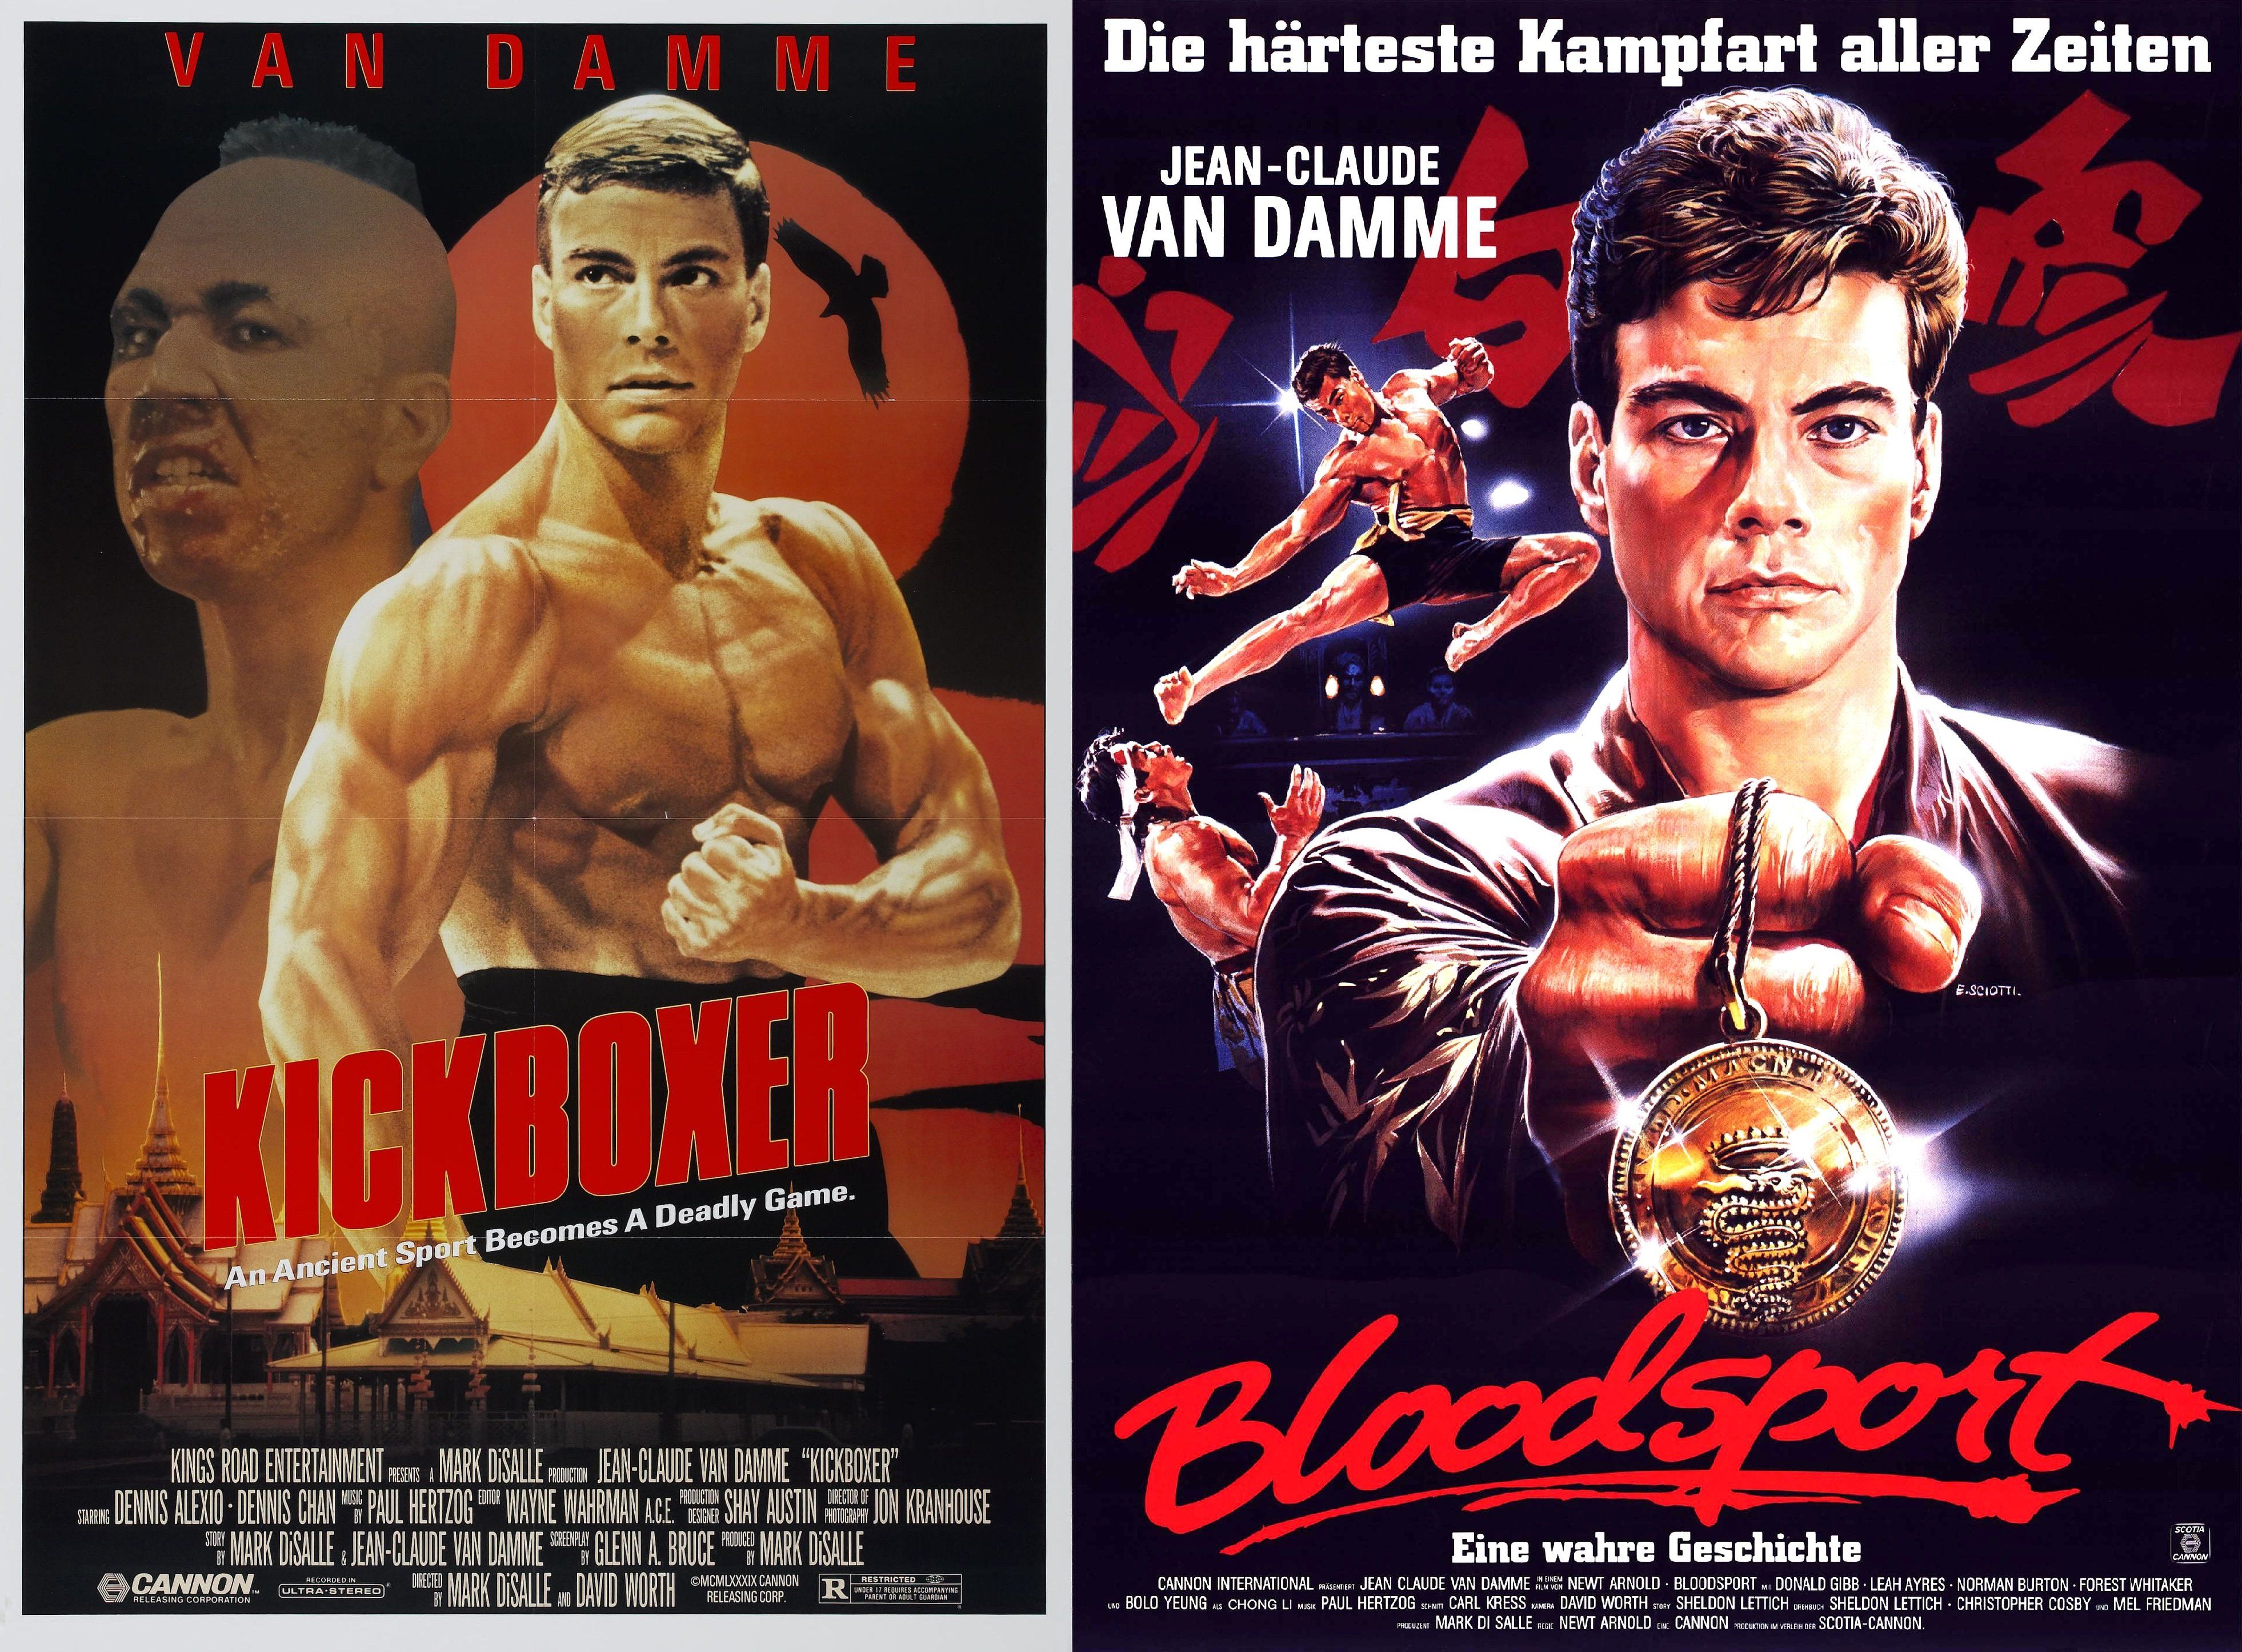 BLOODSPORT martial arts fighting action biography drama wallpapers.